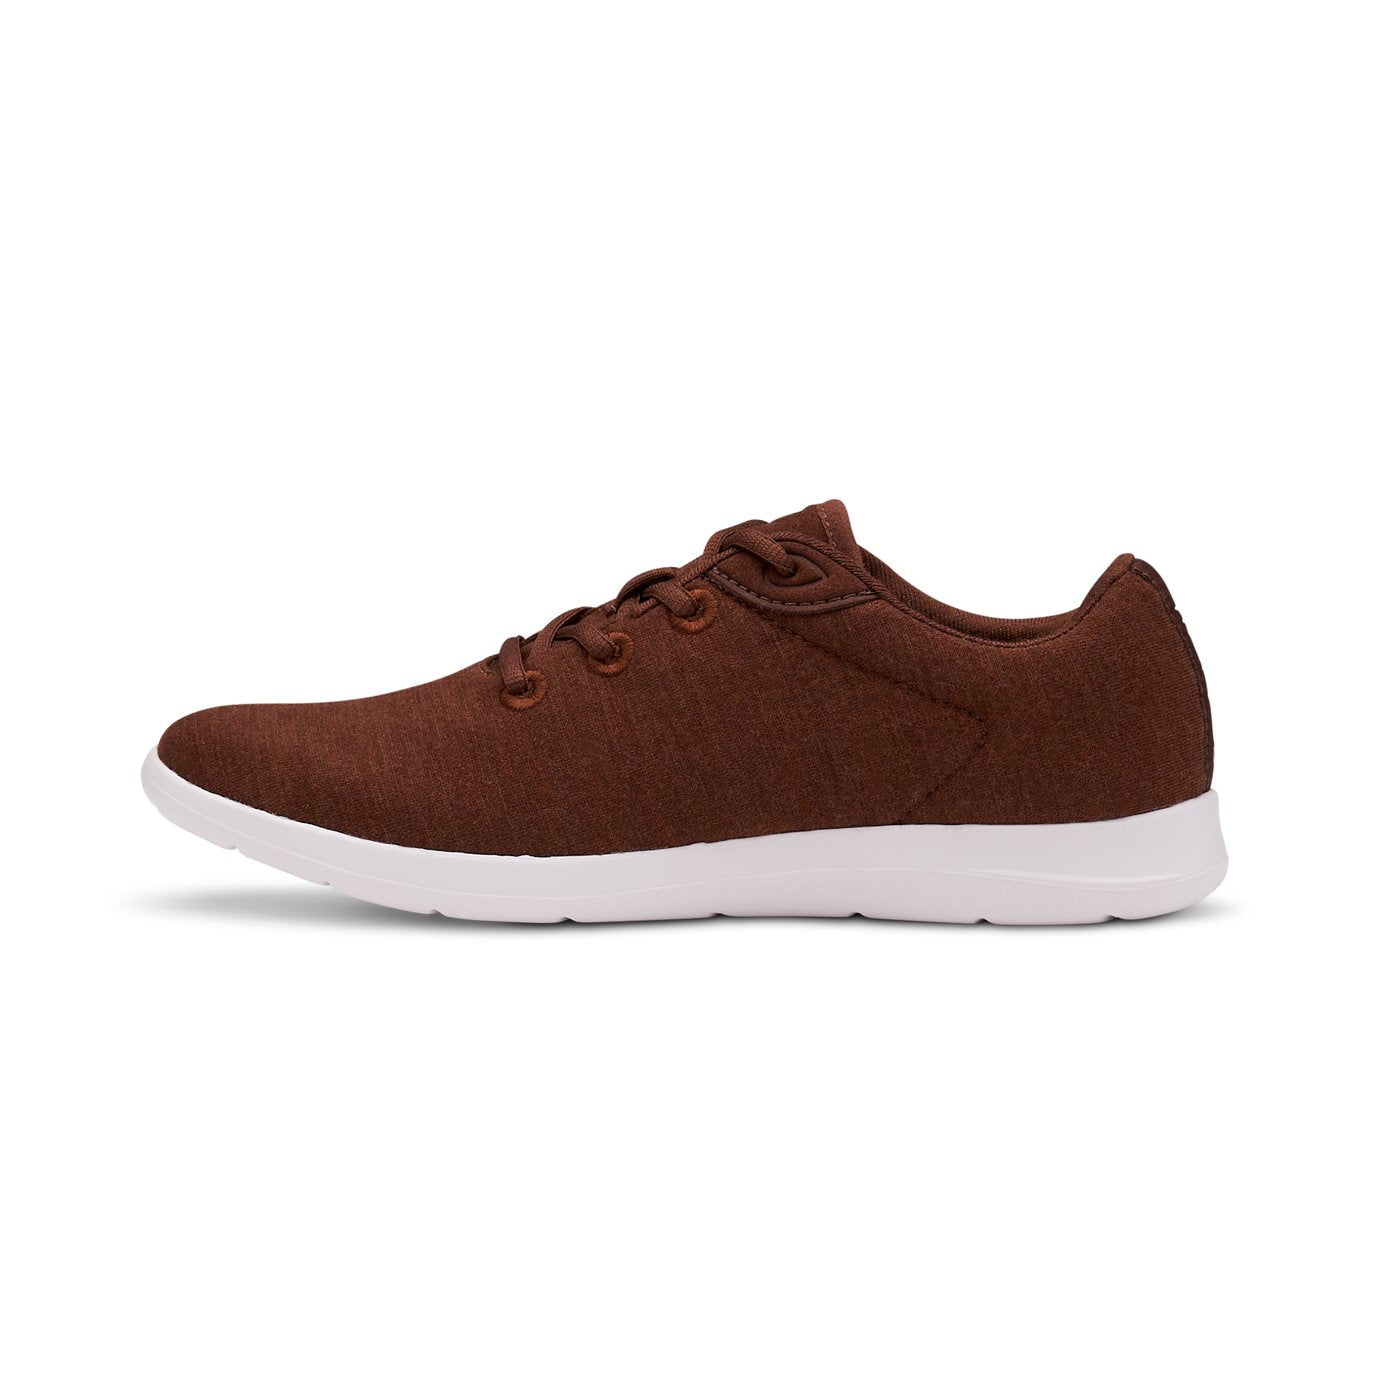 Women's Lace-Ups Brown - Special Offer